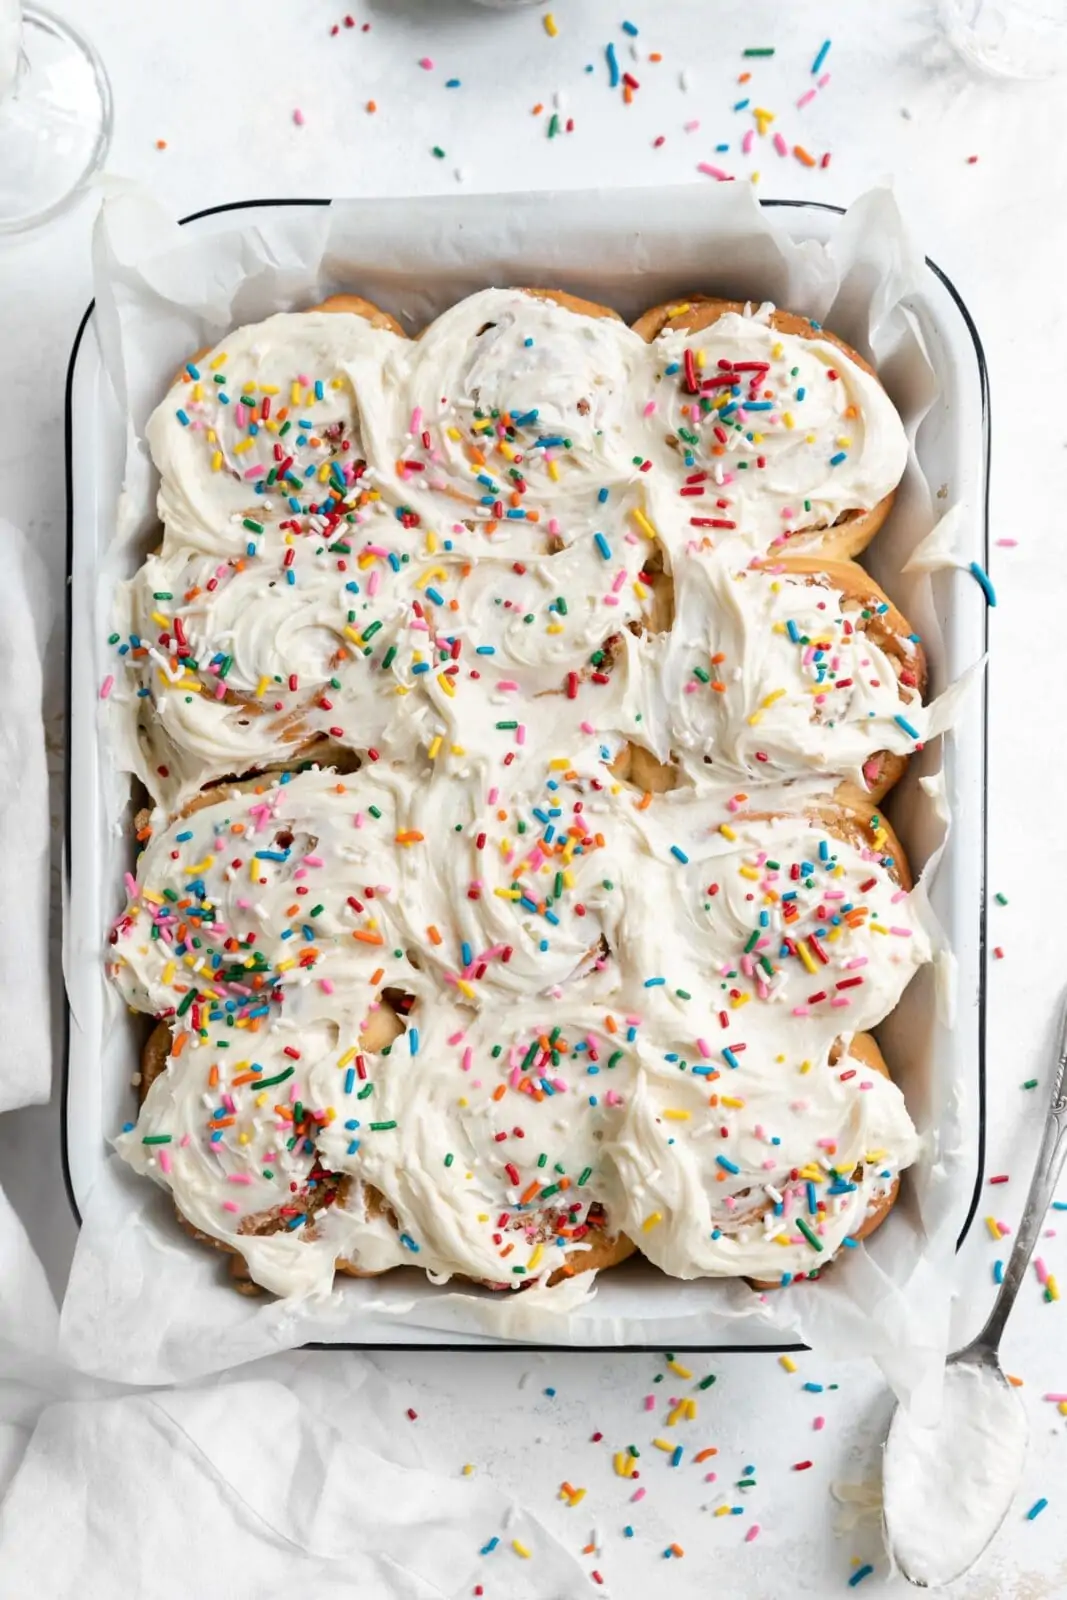 funfetti cinnamon rolls with frosting and sprinkles